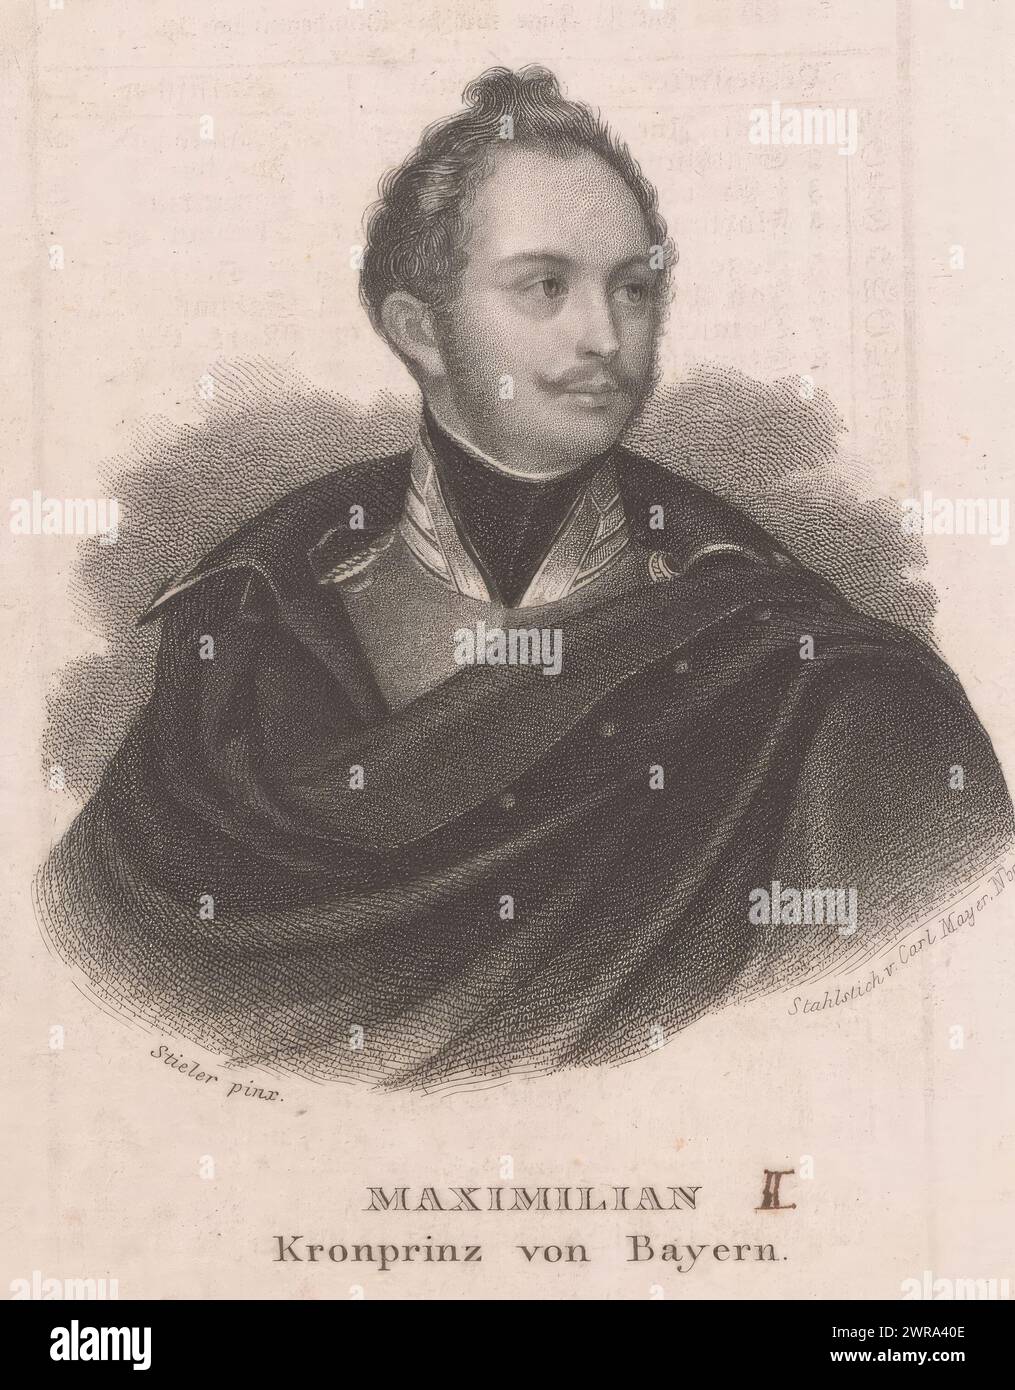 Portrait of Maximilian II of Bavaria as Crown Prince, print maker: Carl Mayer, after painting by: Joseph Karl Stieler, Neurenberg, c. 1830 - 1848, paper, steel engraving, height 104 mm × width 74 mm, print Stock Photo